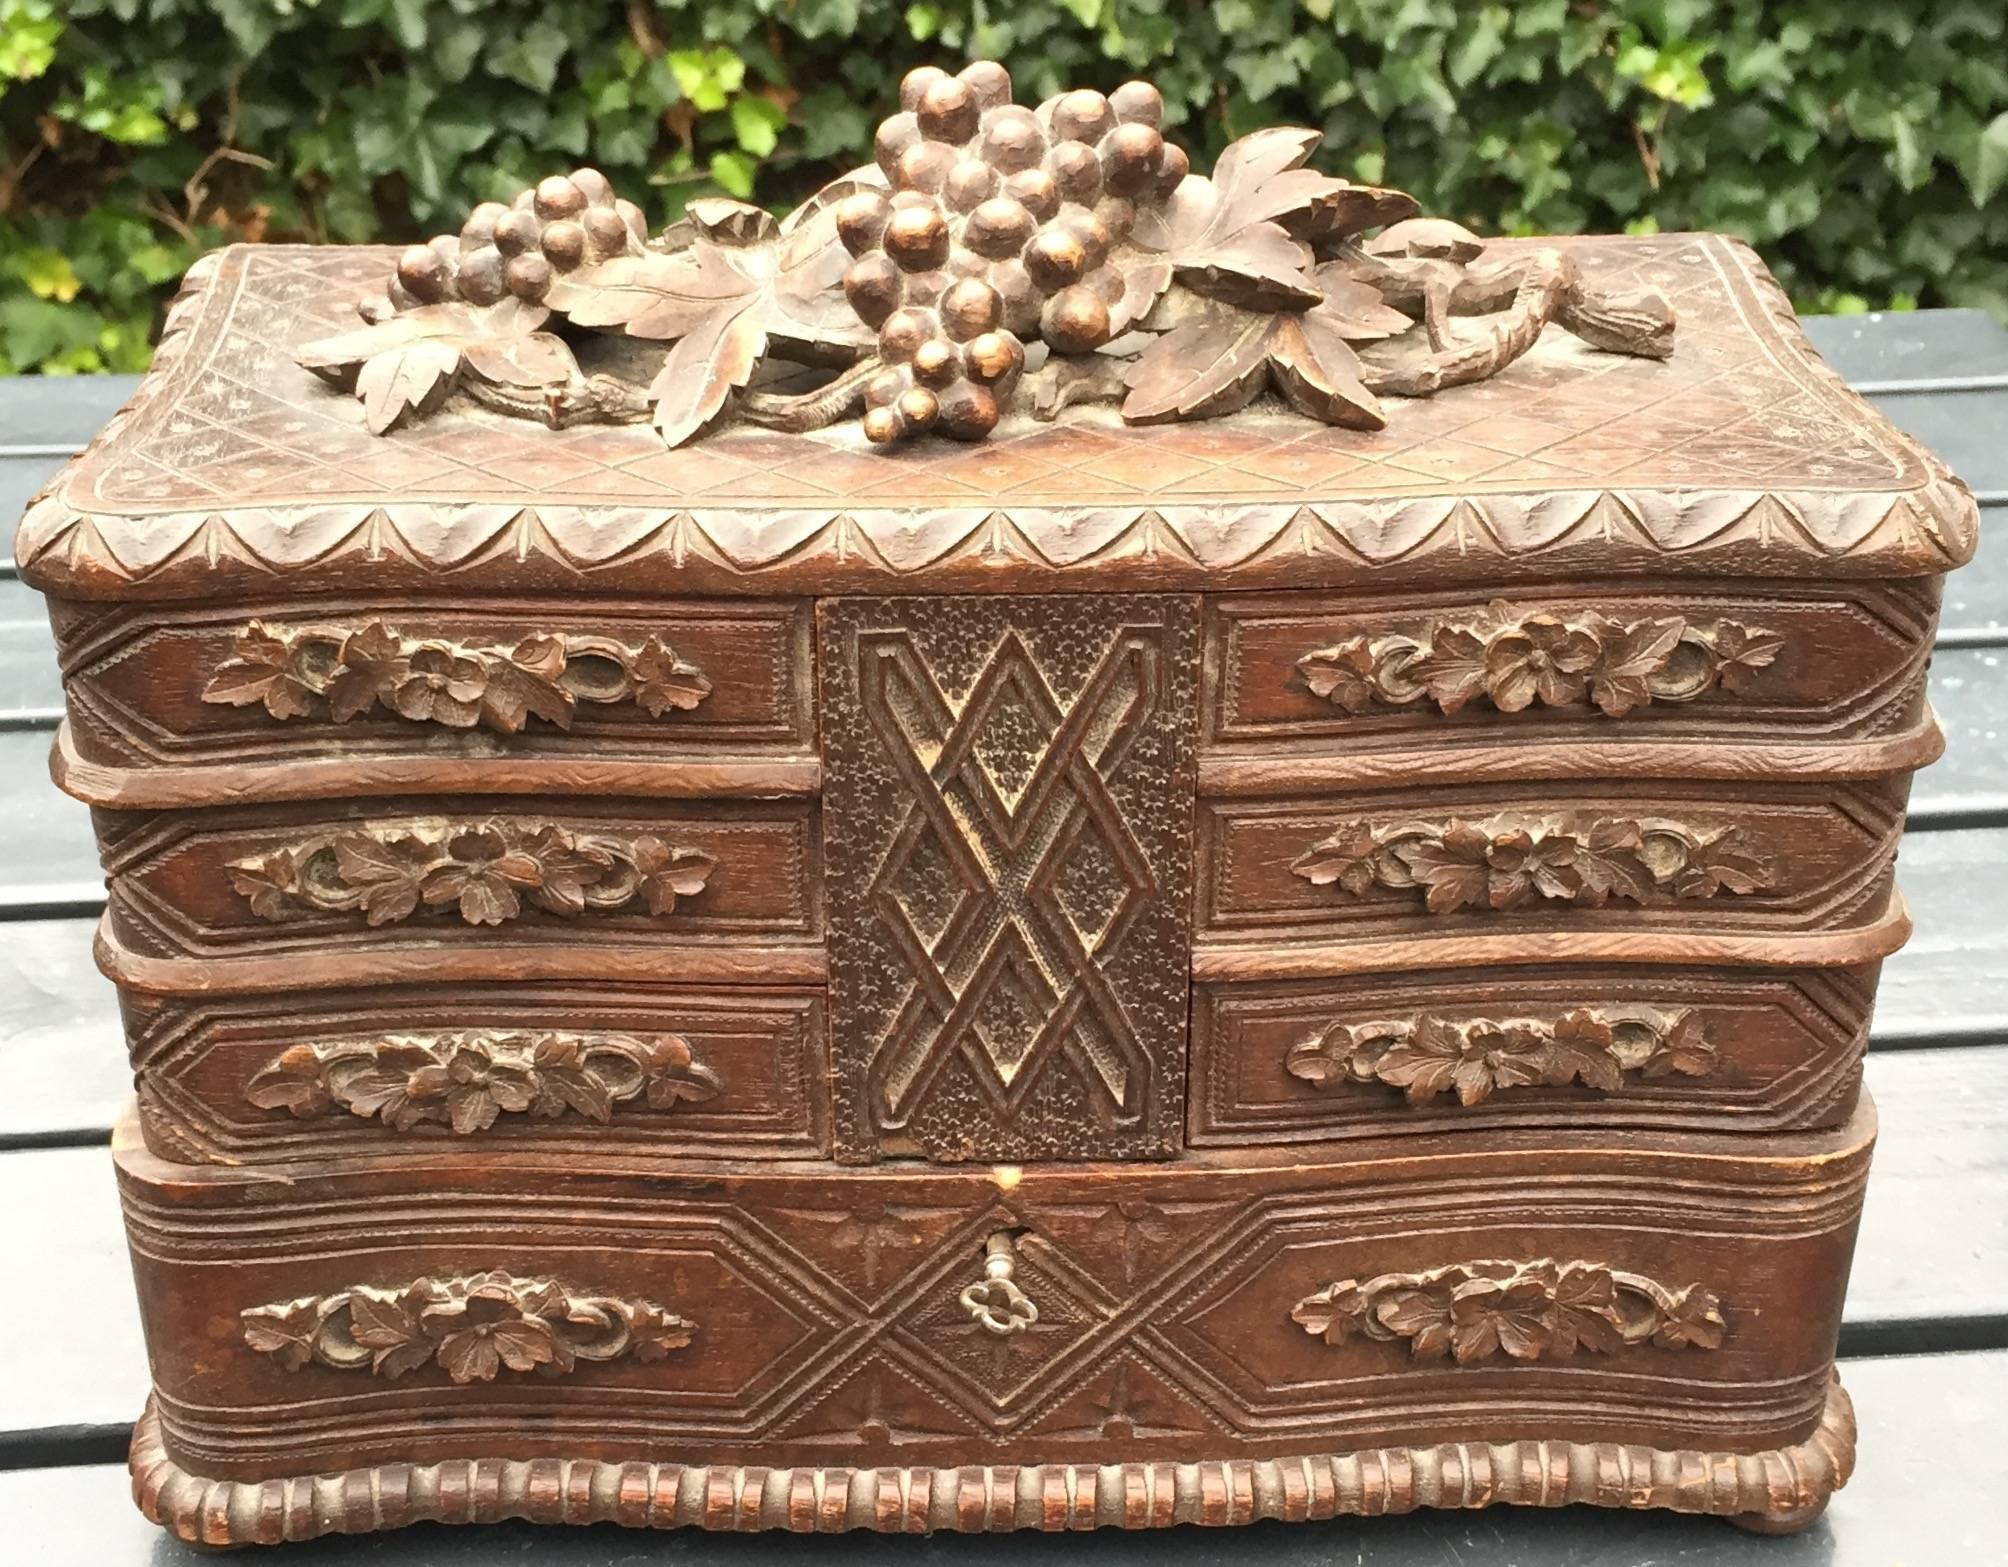 A beautiful antique black forest Jewelry box with fine interior.

This rare and large jewelry box makes a beautiful accessory for a lady with an eye for fine arts. It is a very well carved gem and highly practical with many drawers and a good